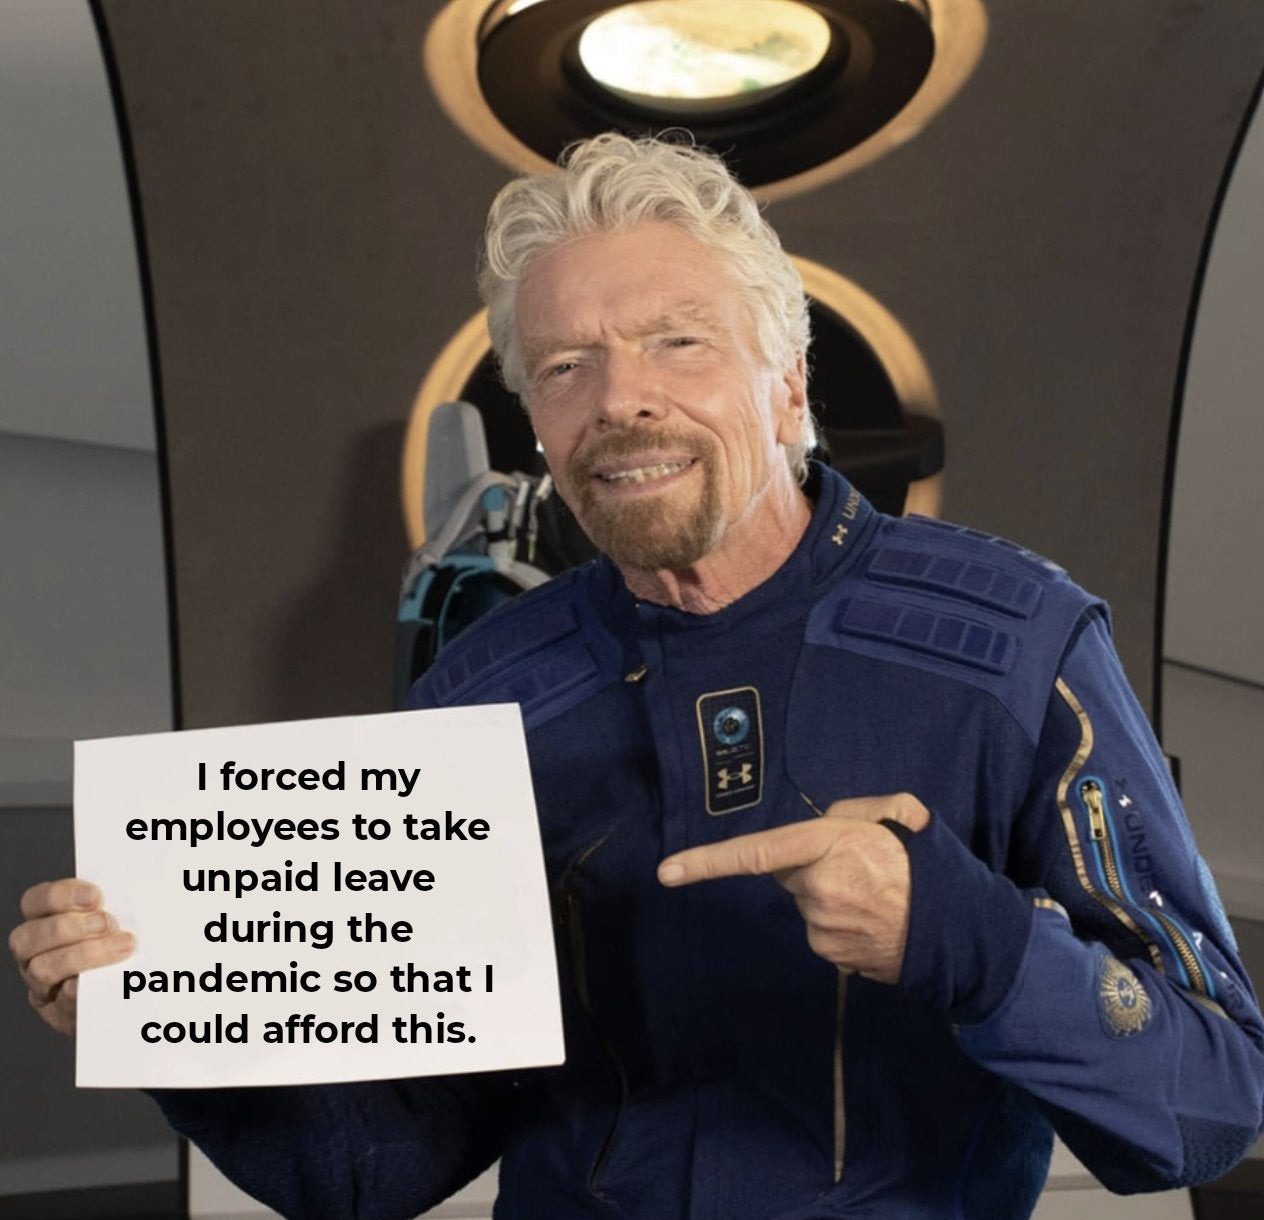 I forced my employees to take unpaid leave during the pandemic so that I could afford this Richard Branson meme